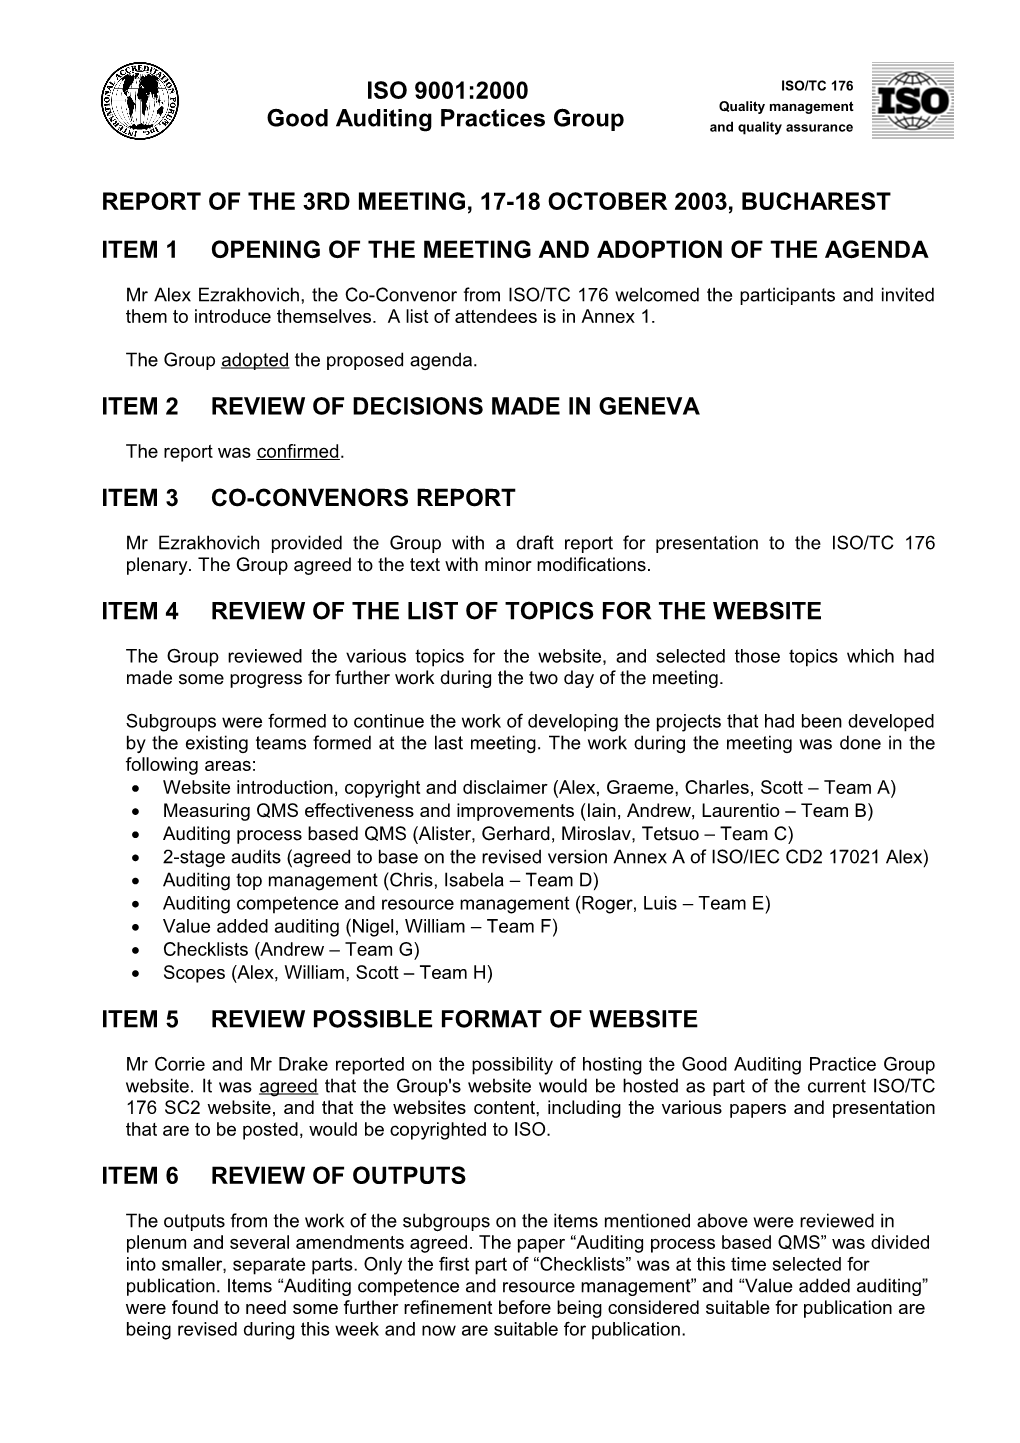 ITEM 1 Opening of the Meeting and Adoption of the Agenda